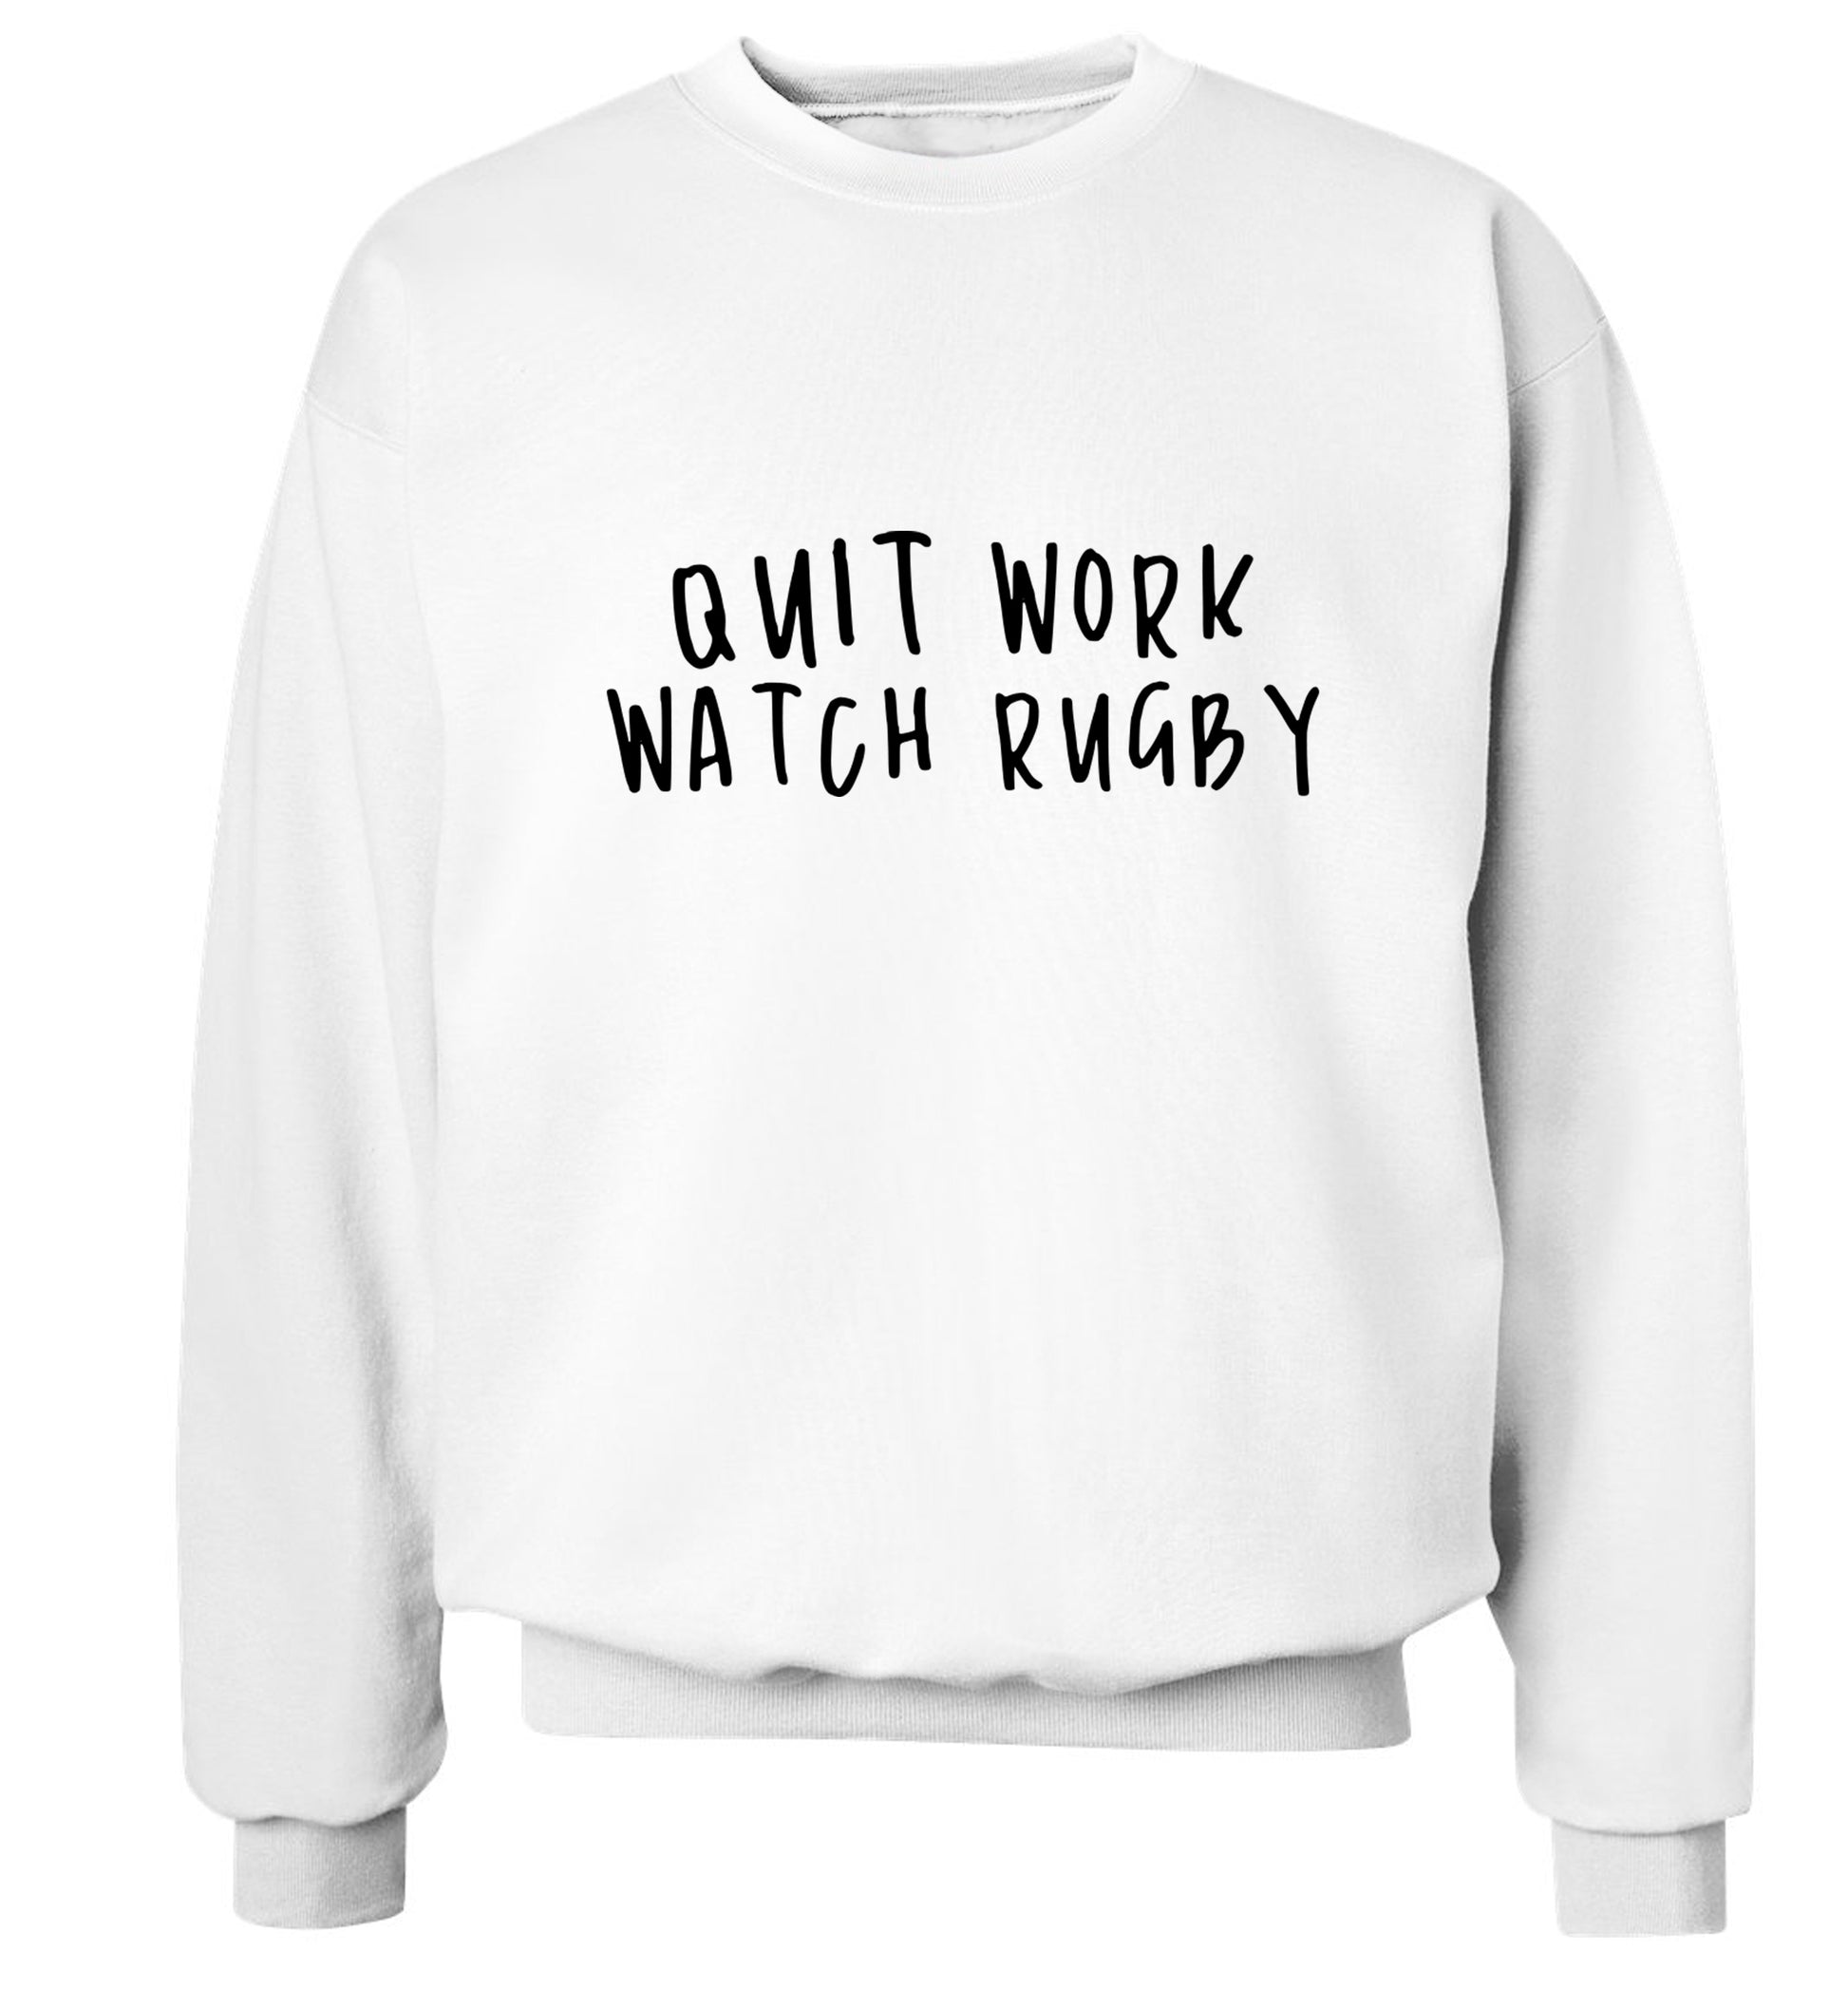 Quit work watch rugby Adult's unisex white Sweater 2XL